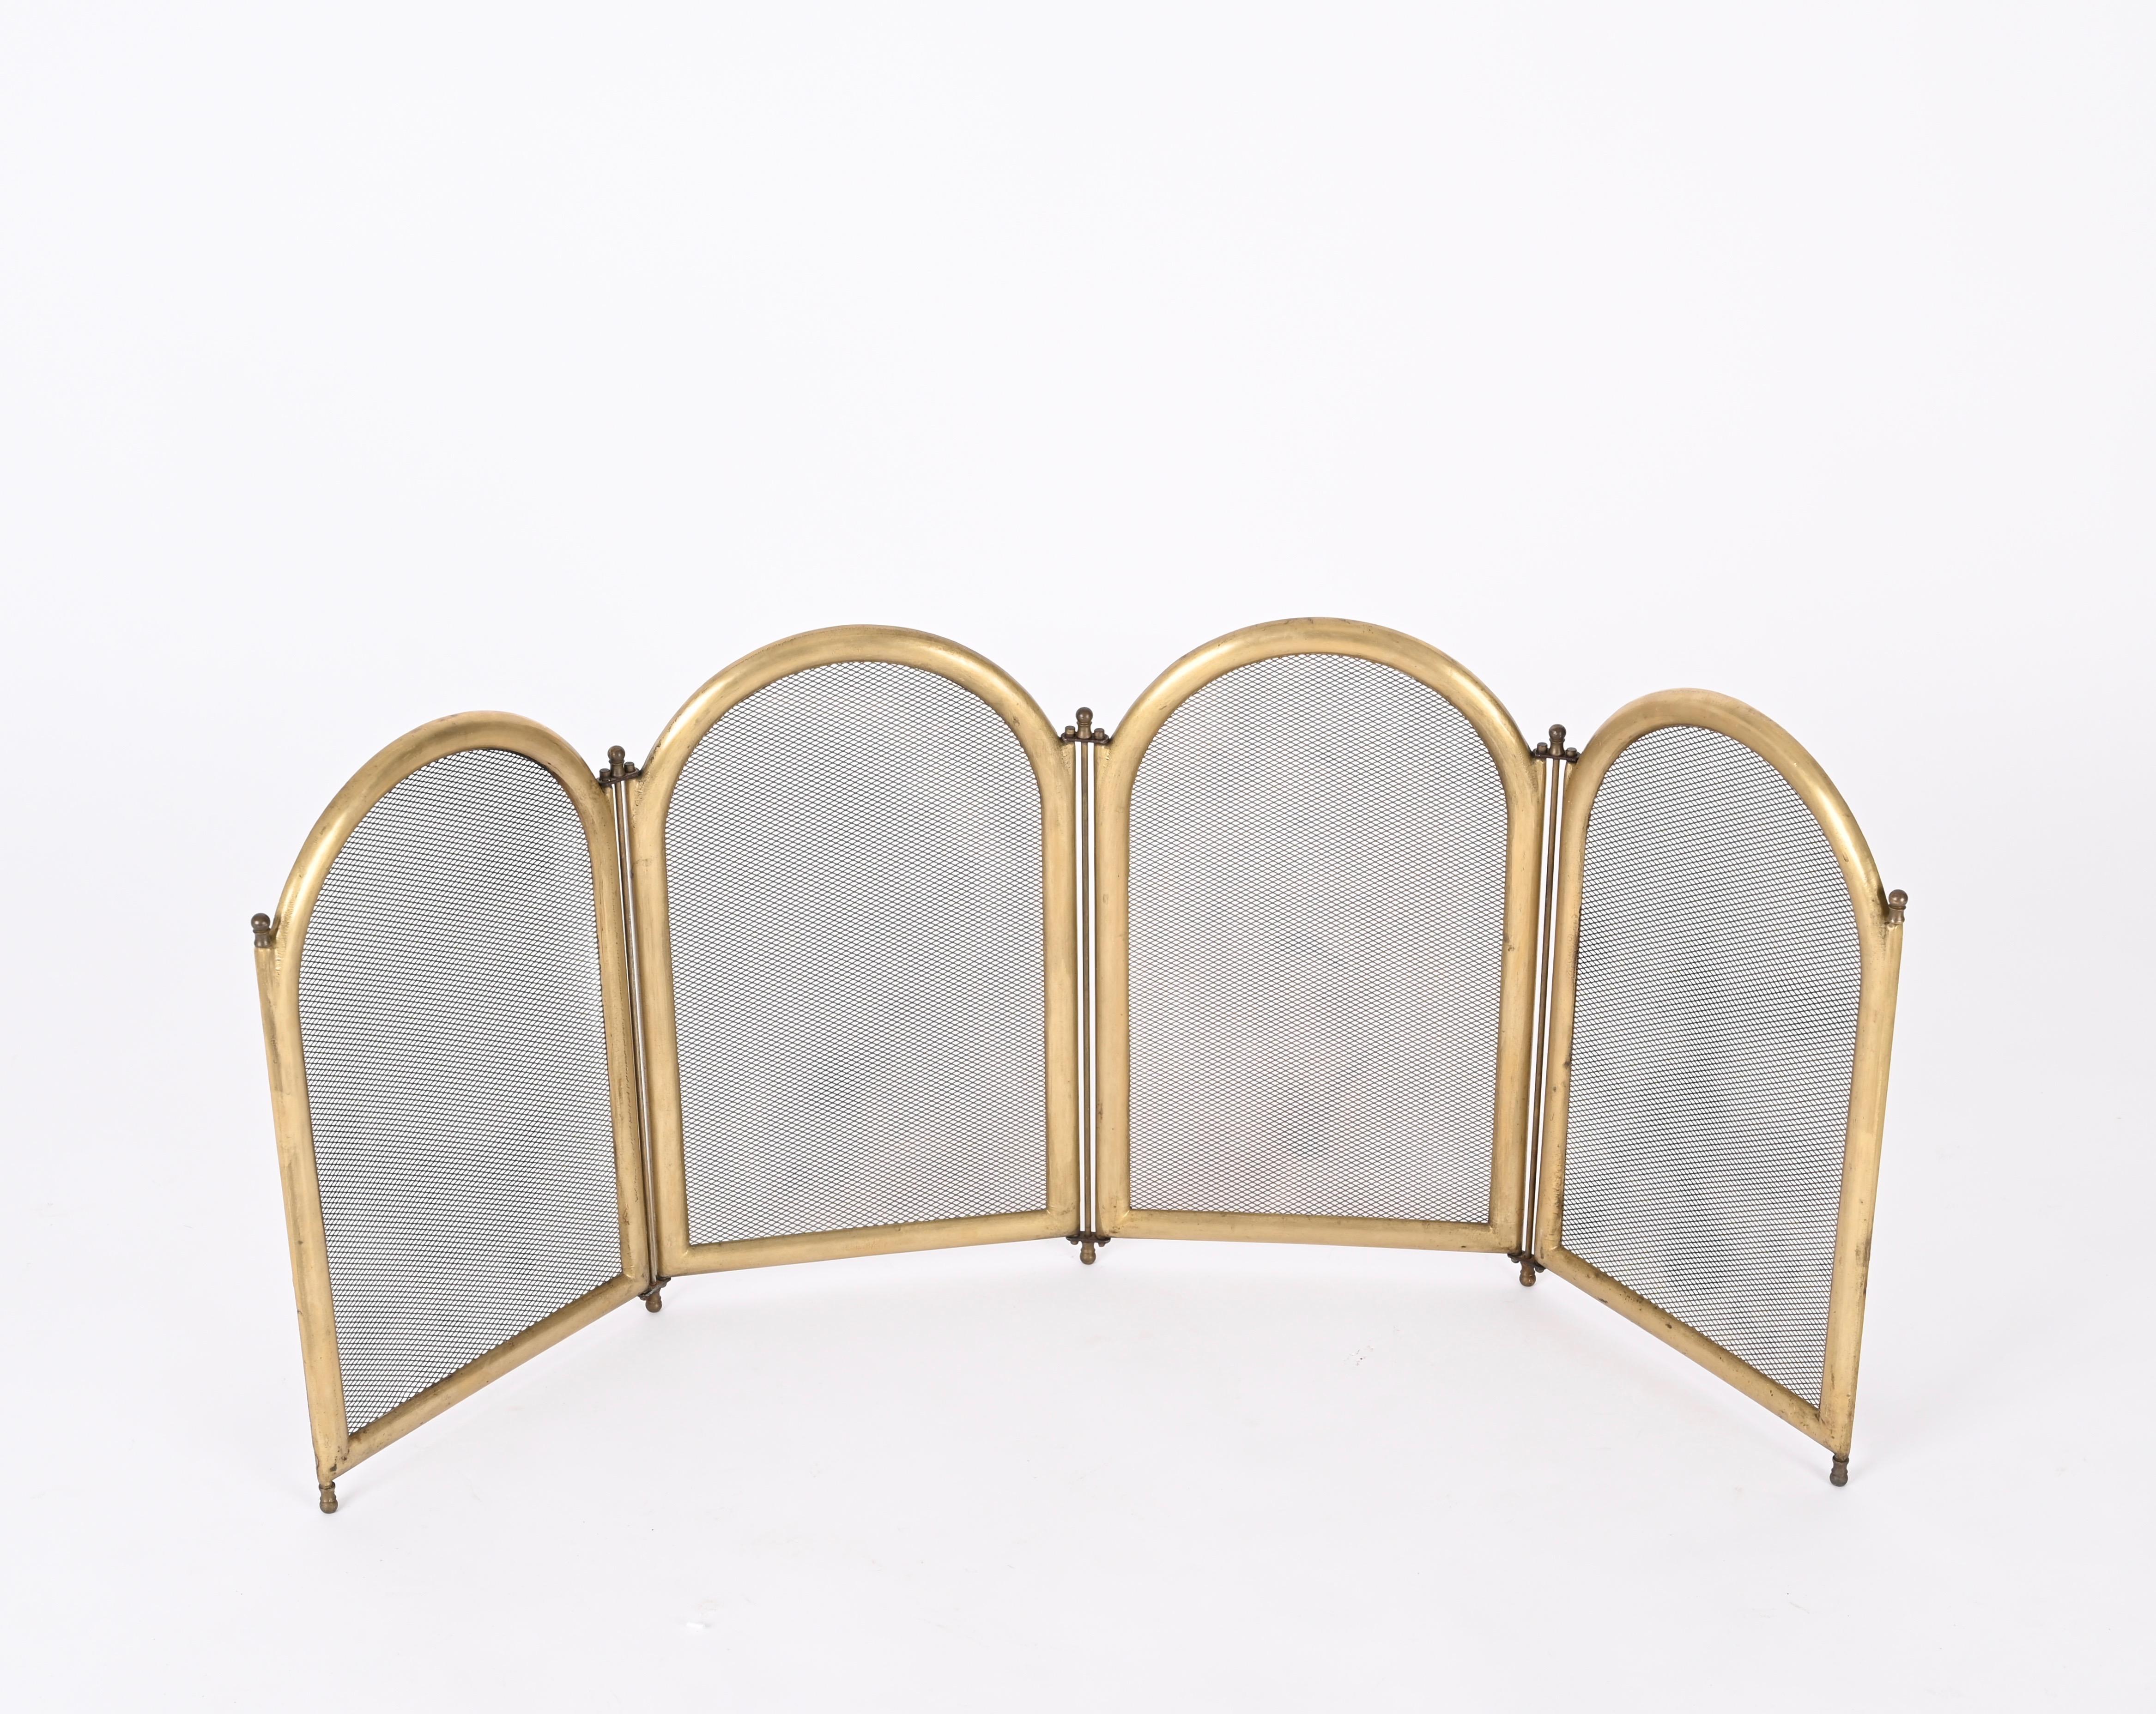 Italian Solid Brass Folding Fireplace Screen or Fire Guard, Italy 1960s For Sale 5